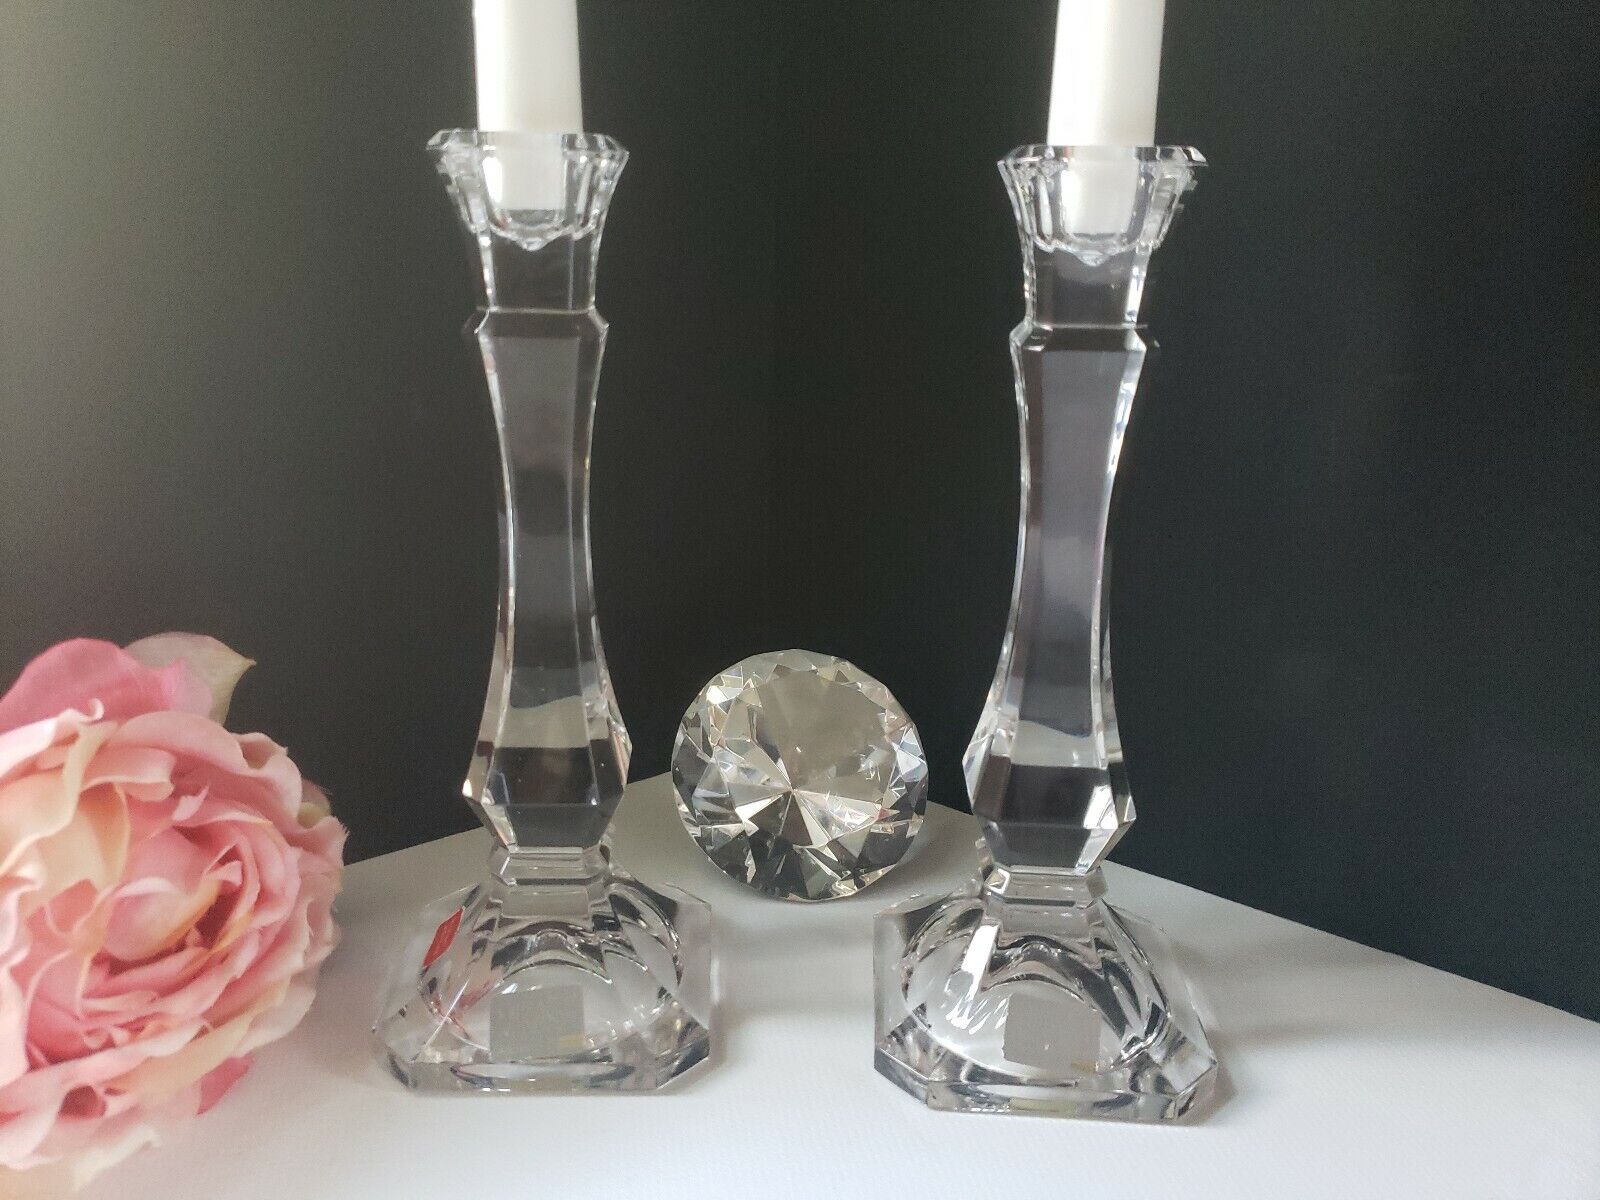 Mikasa - Pair of Lead Crystal Candle Holders  Made in Austria - NEW/DISPLAY ITEM Mikasa - фотография #10